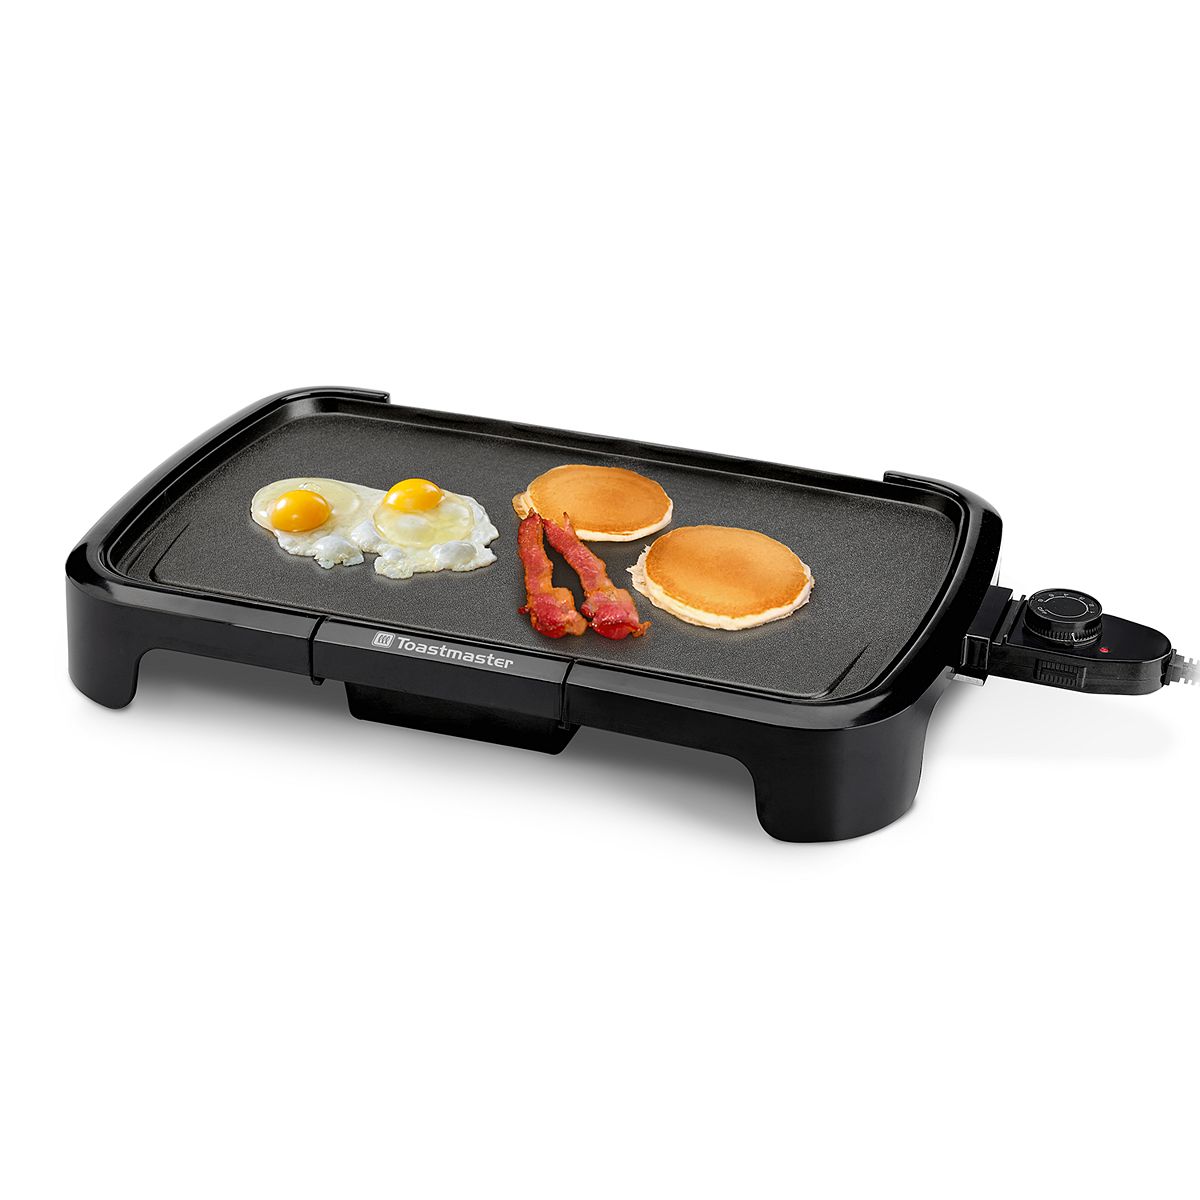 toastmaster-10-x-16-electric-griddle-for-9-54-after-10-mir